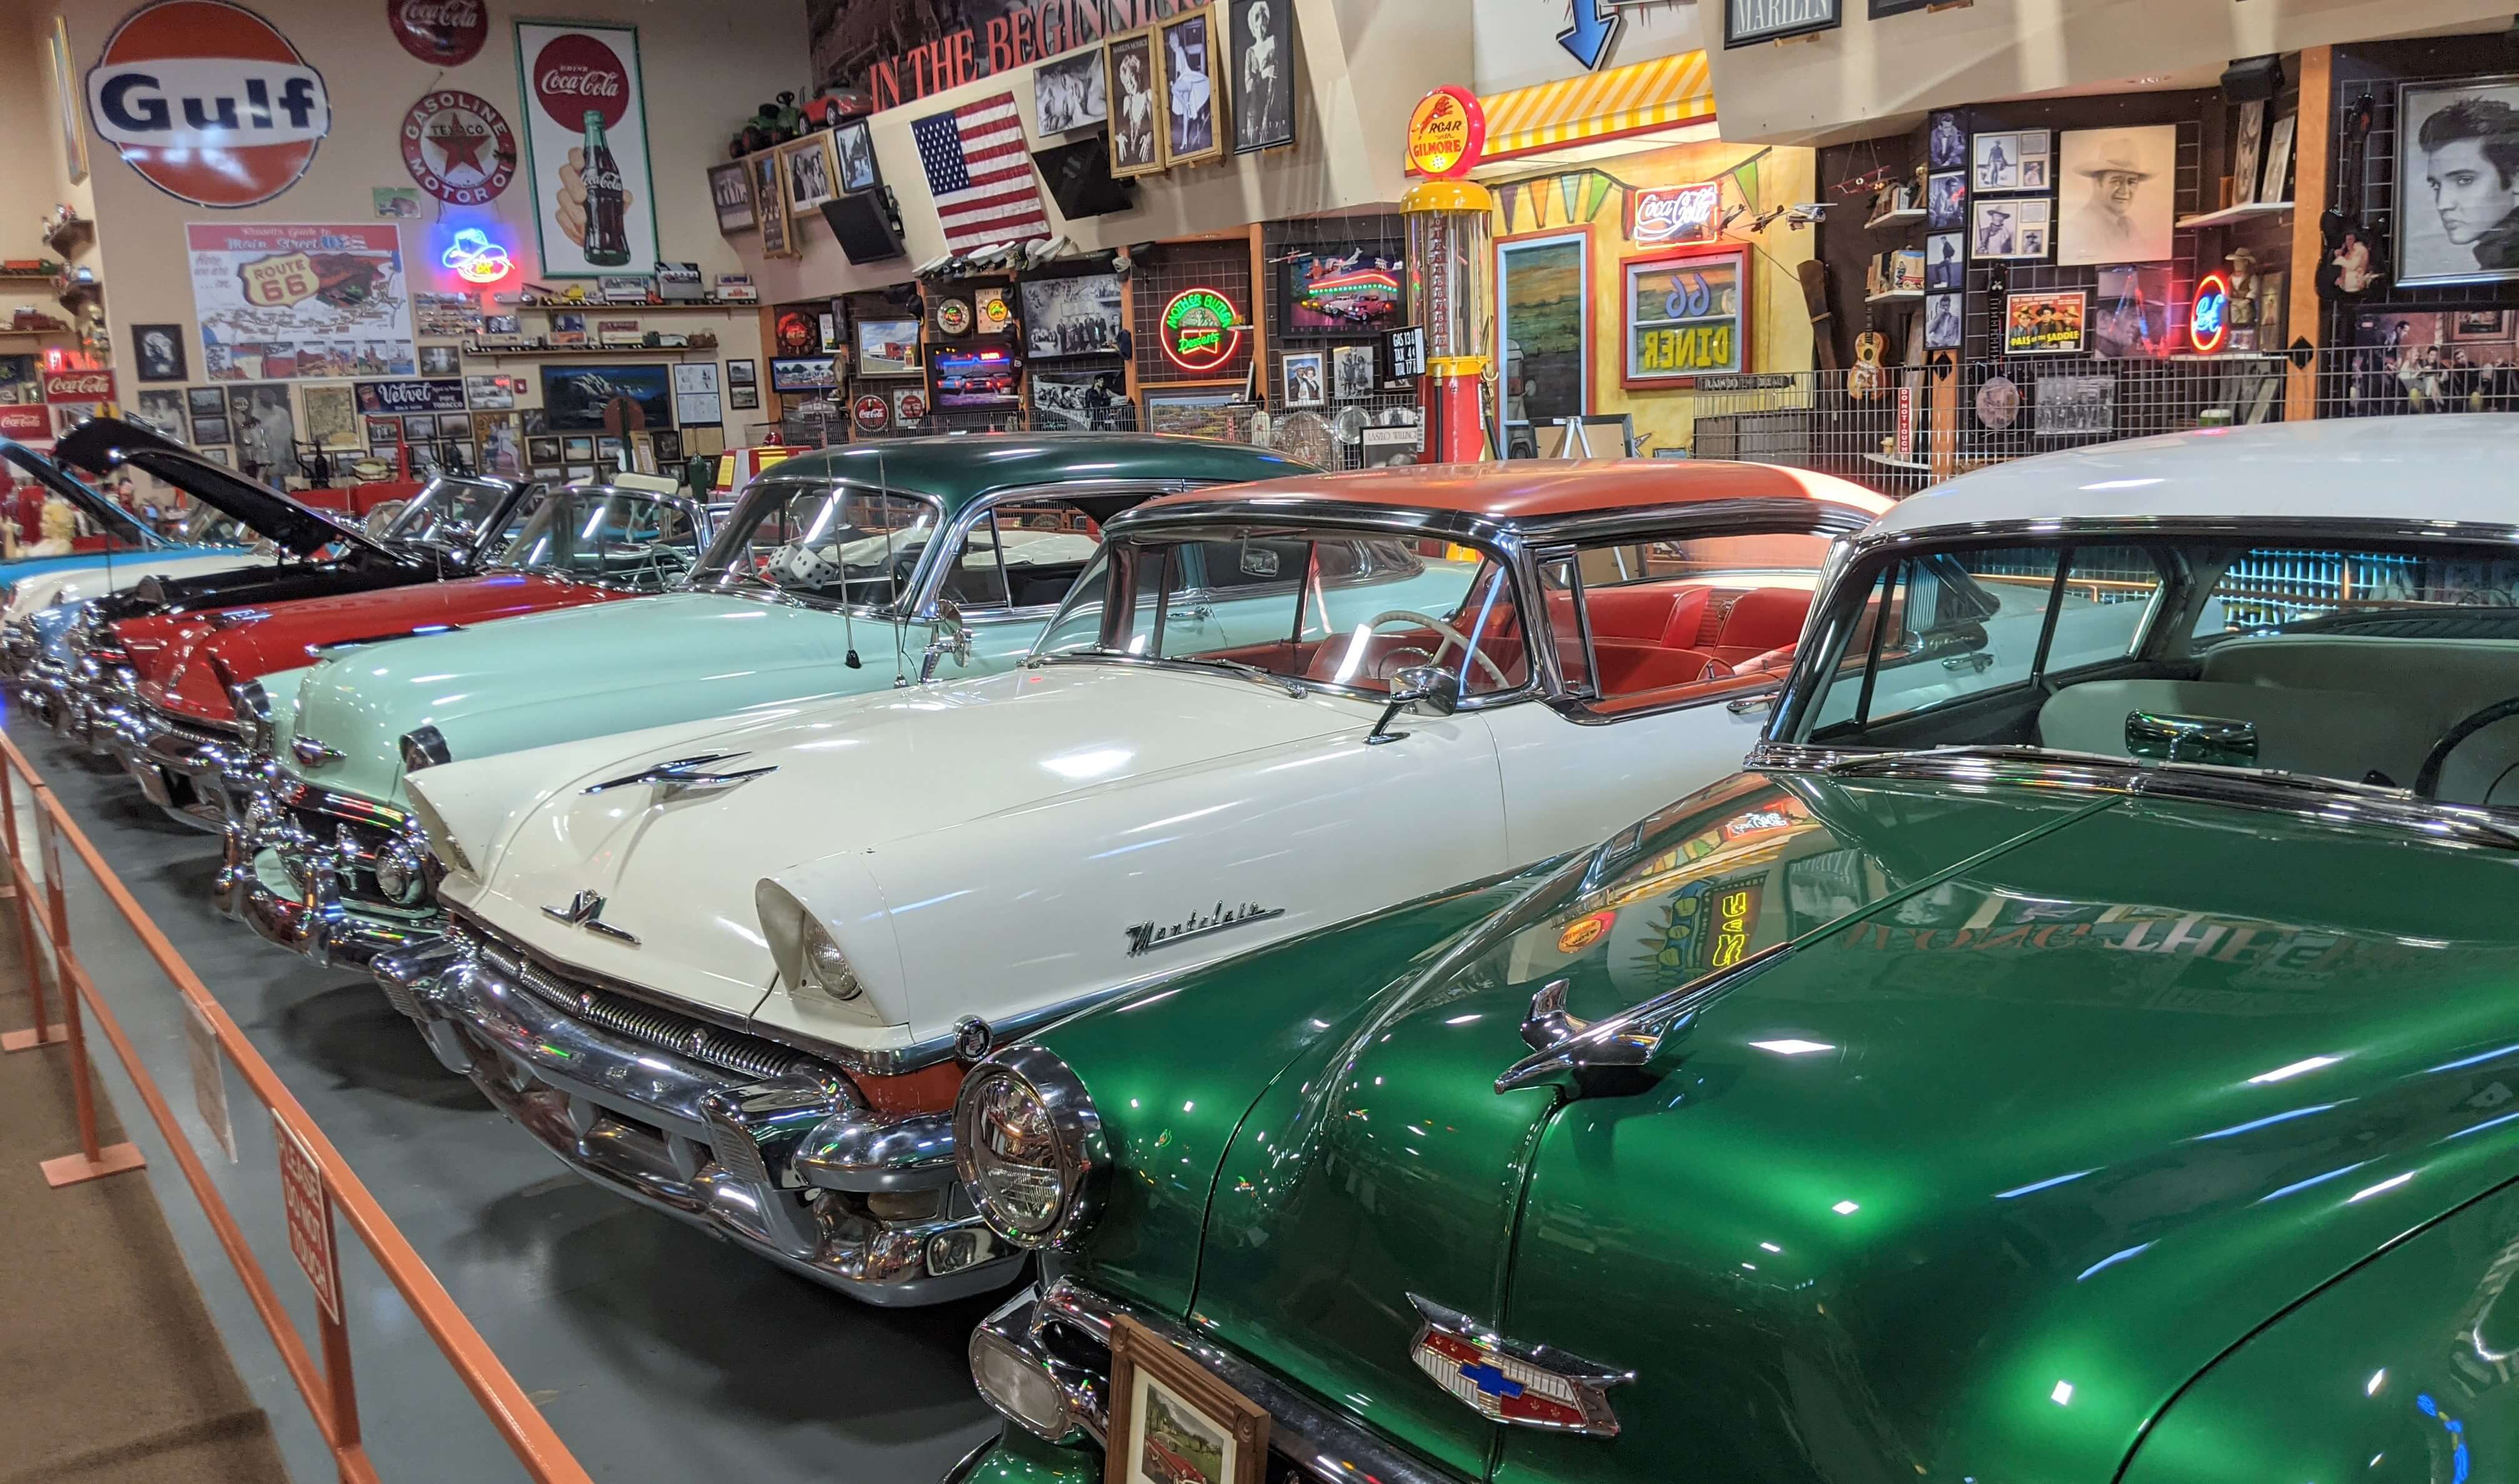 There was a free car museum at this gas station. Because why not?